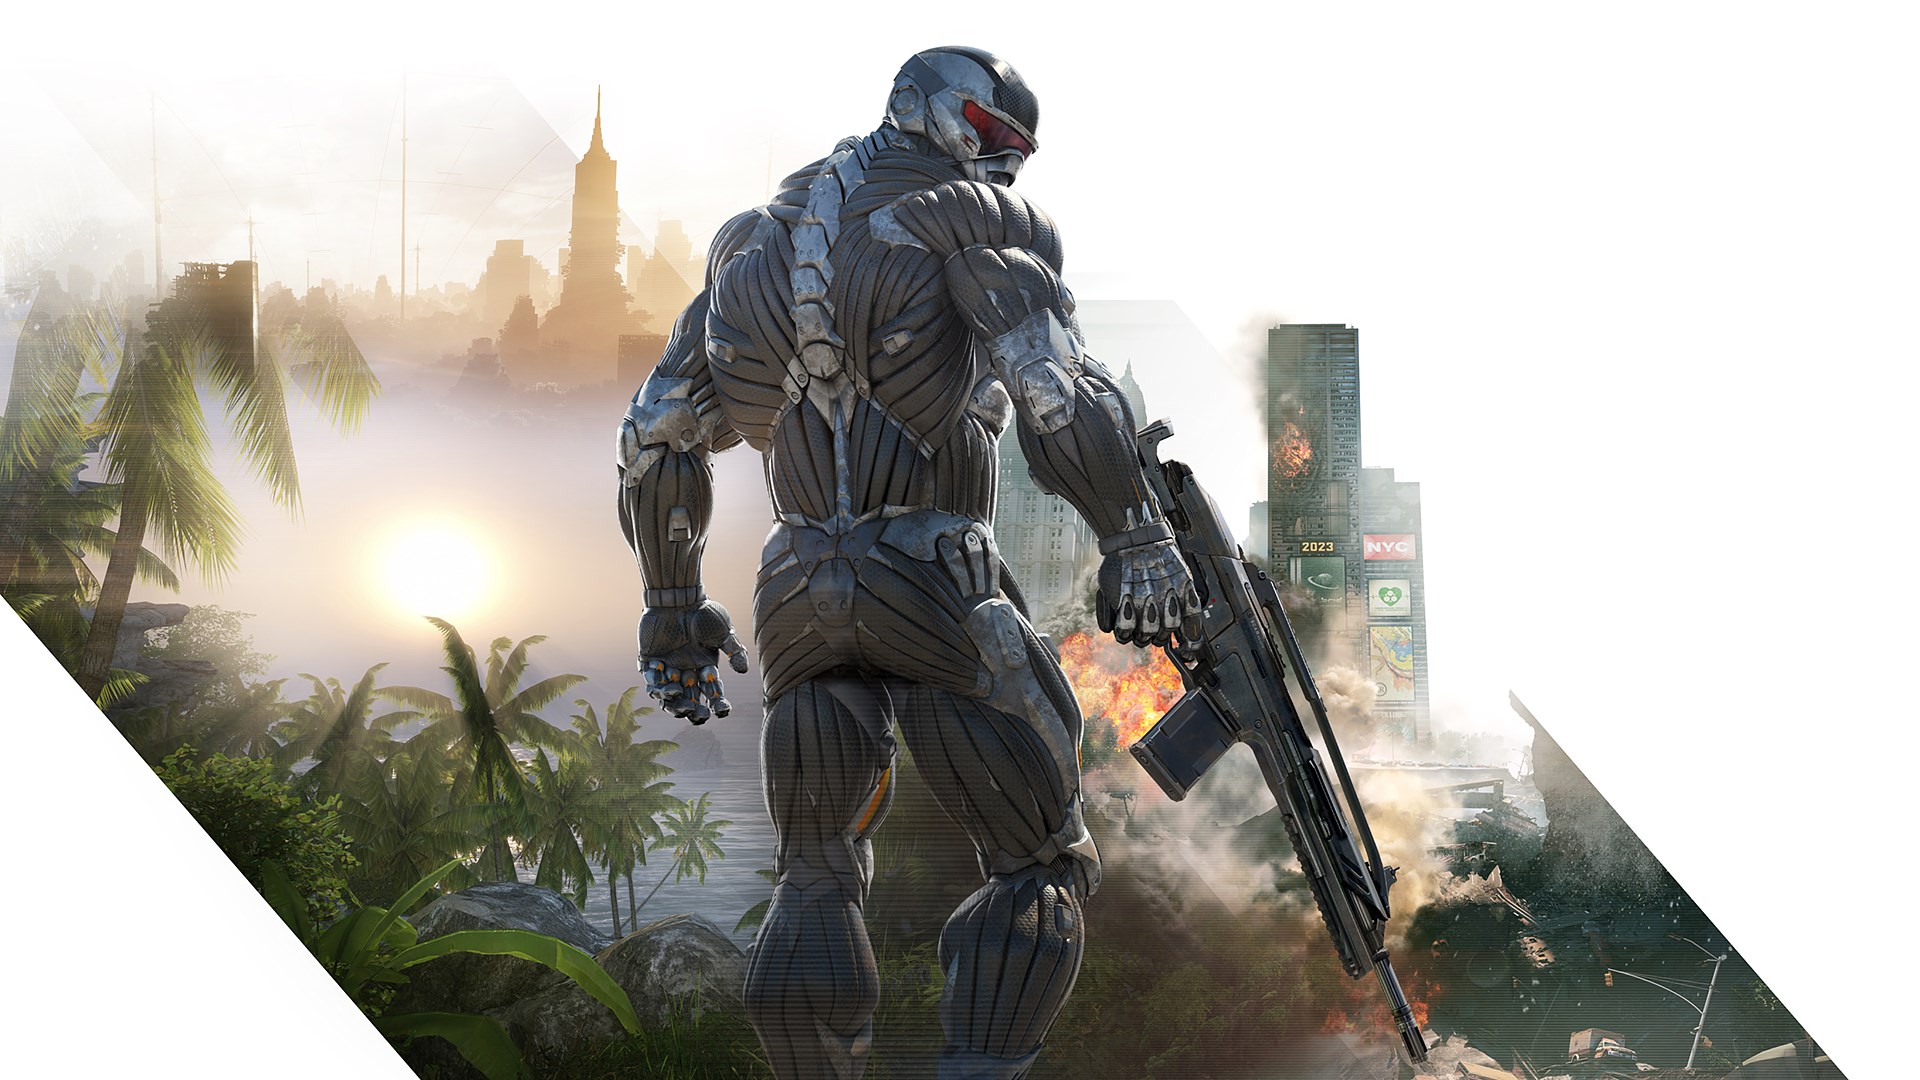 Video For Crysis Remastered Trilogy Is Now Available For Xbox One And Xbox Series X|S